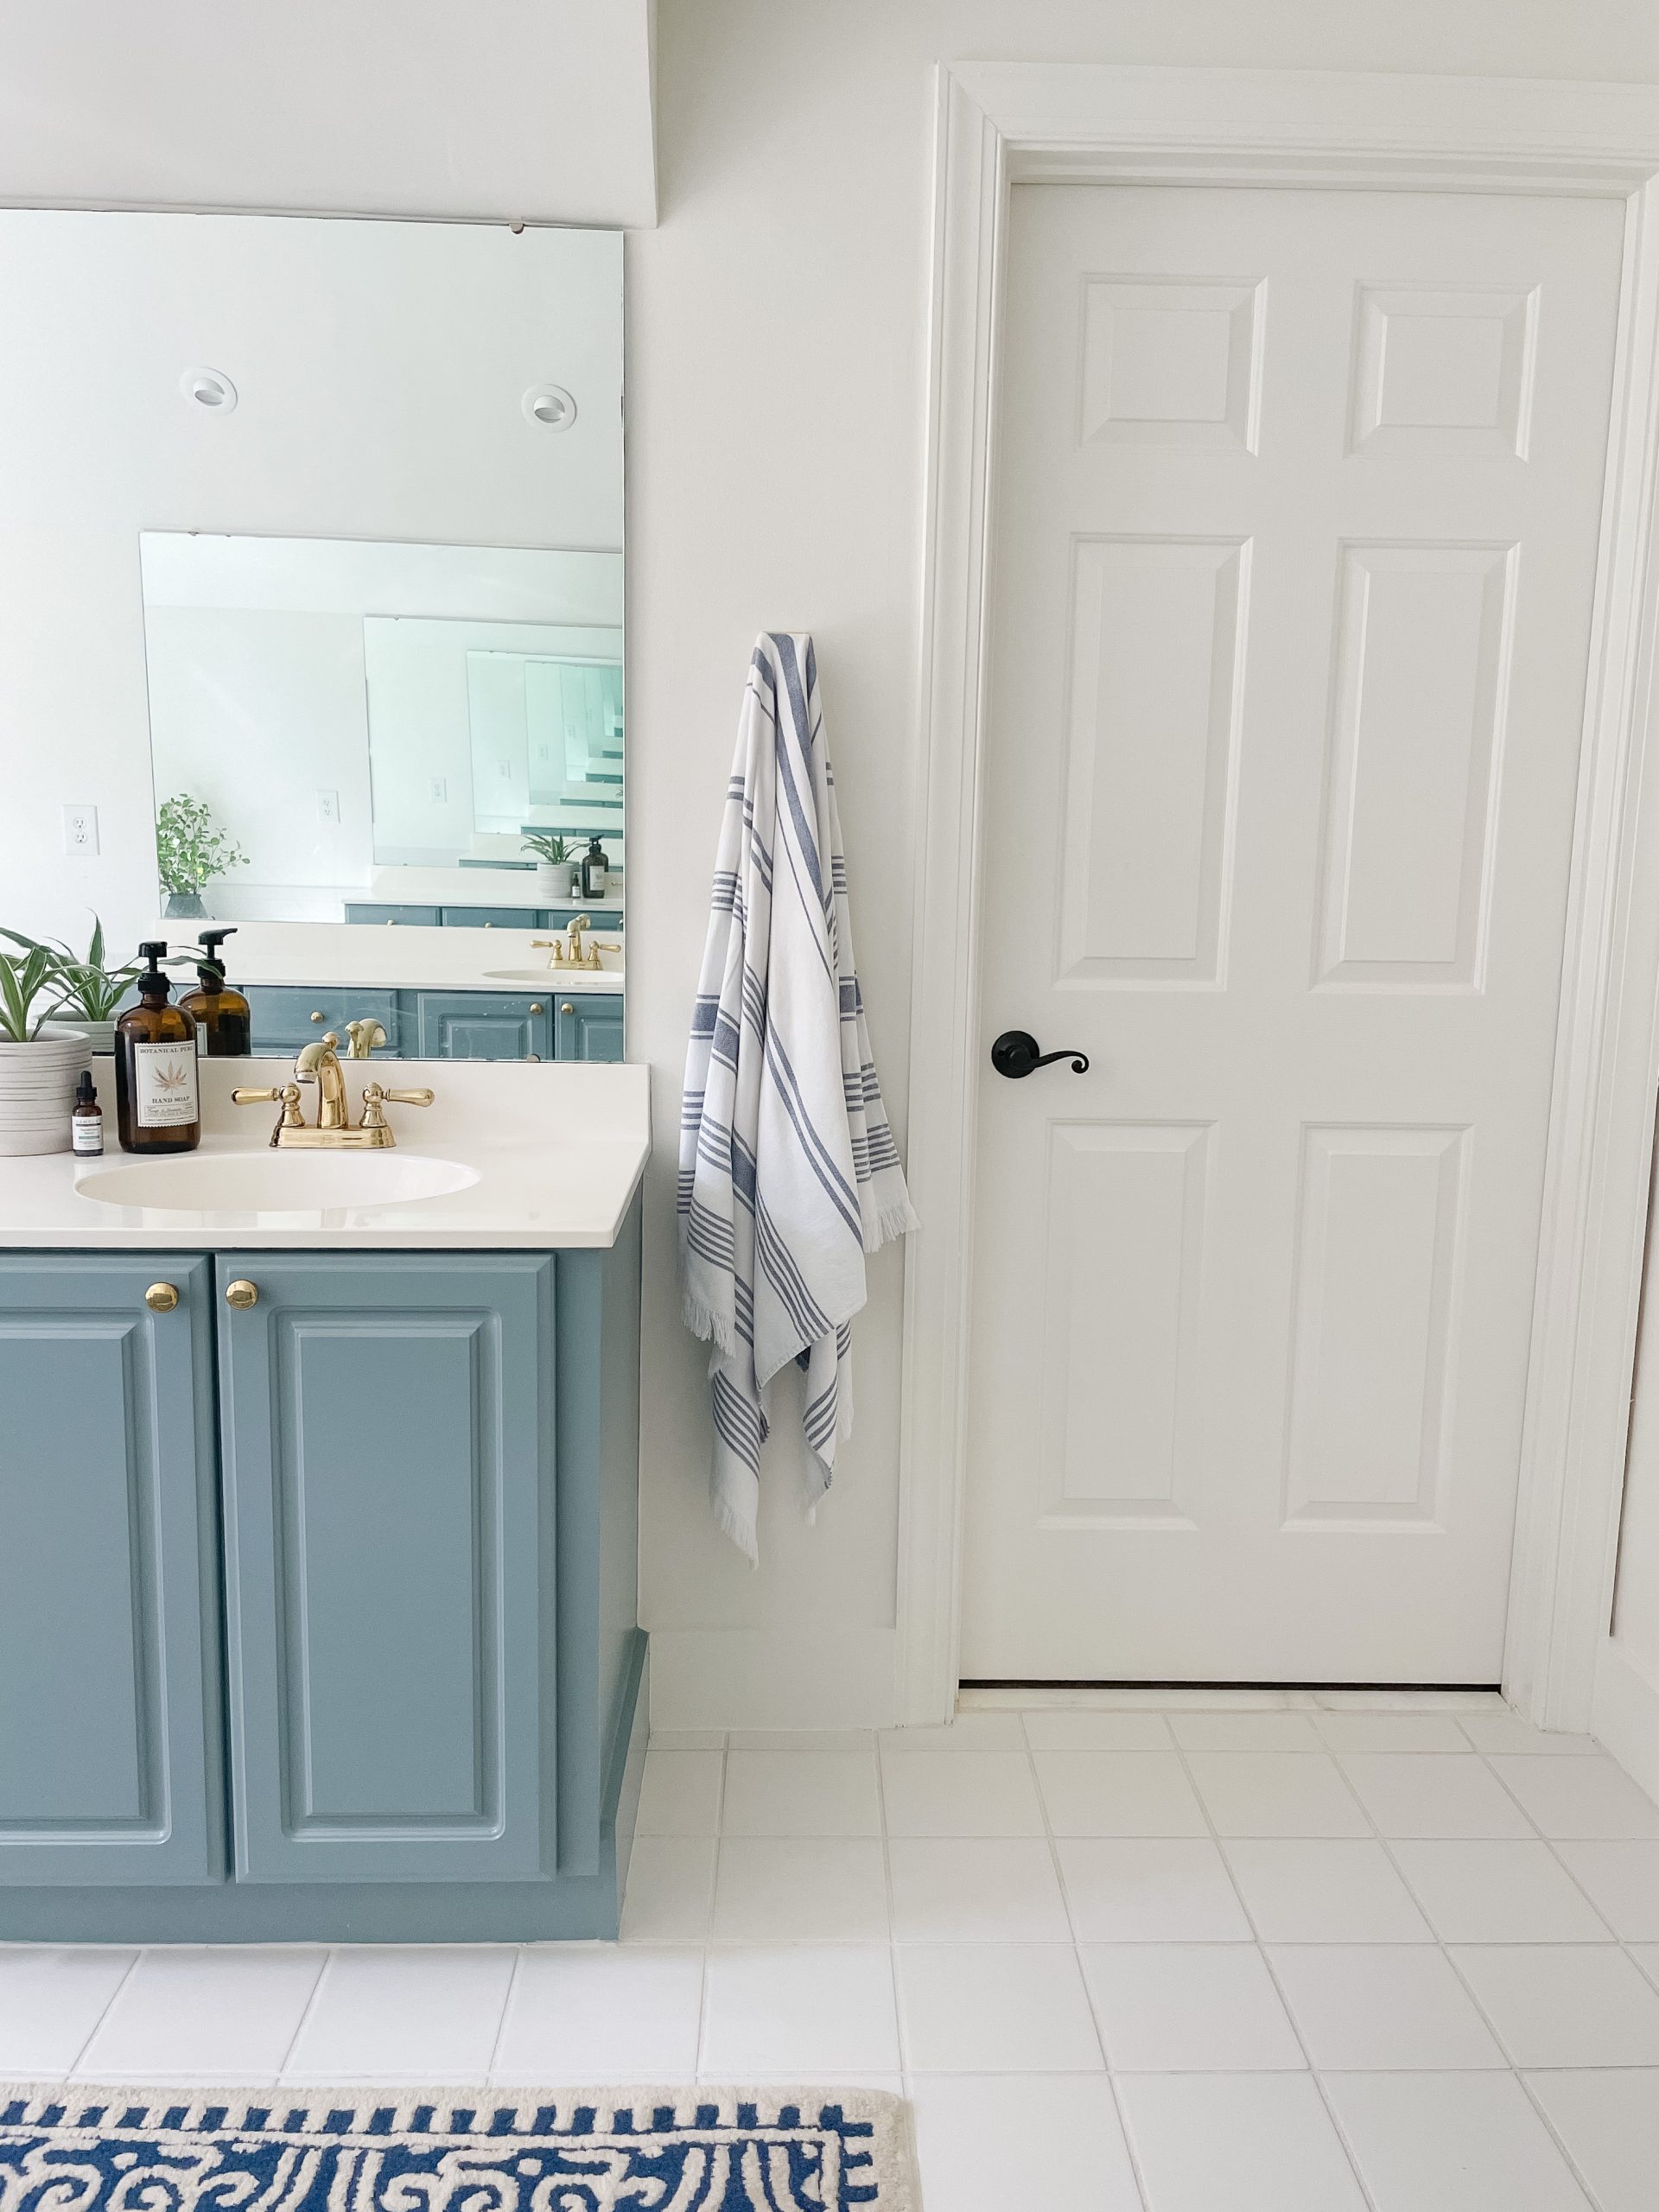 Blue Painted Bathroom Cabinet in a white bathroom with pvc trim baseboards